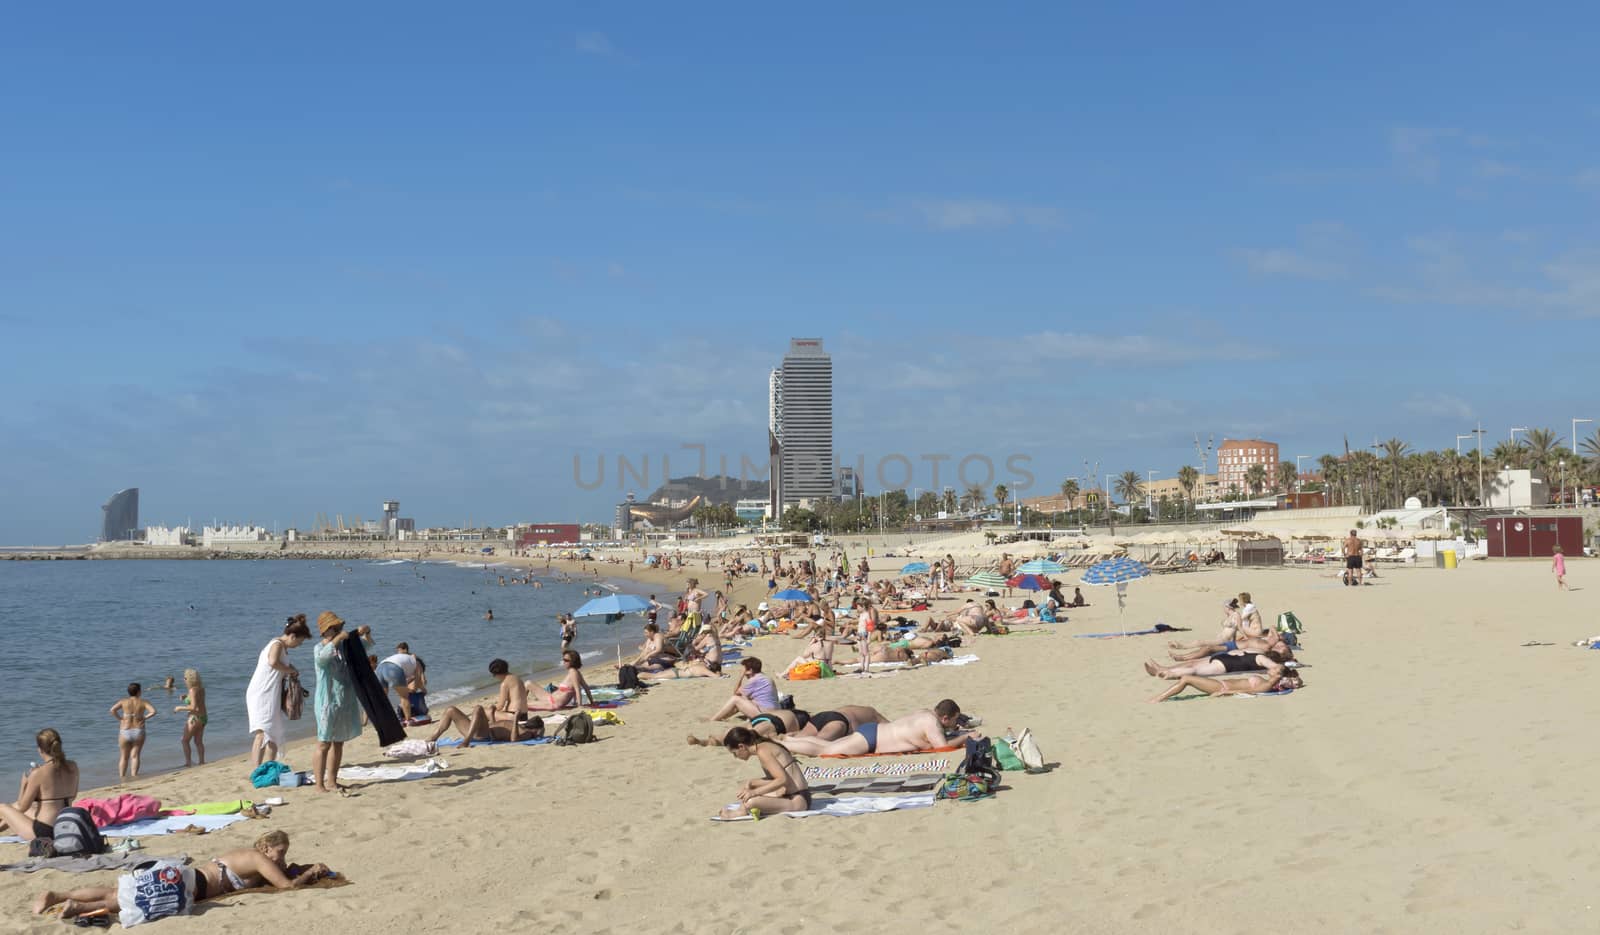 BARCELONA, SPAIN - JULY 9, 2015: Barceloneta Beach and skyscraper Torre Mapfre in the Olympic Port. It is named after its owner, Mapfre, an insurance company. This tower holds the title for highest helipad in Spain at 505 feet above ground.

Barcelona, Spain - July 9, 2015: Barceloneta Beach and skyscraper Torre Mapfre in the Olympic Port. It is named after its owner, Mapfre, an insurance company. This tower holds the title for highest helipad in Spain at 505 feet above ground. People are resting on the beach.